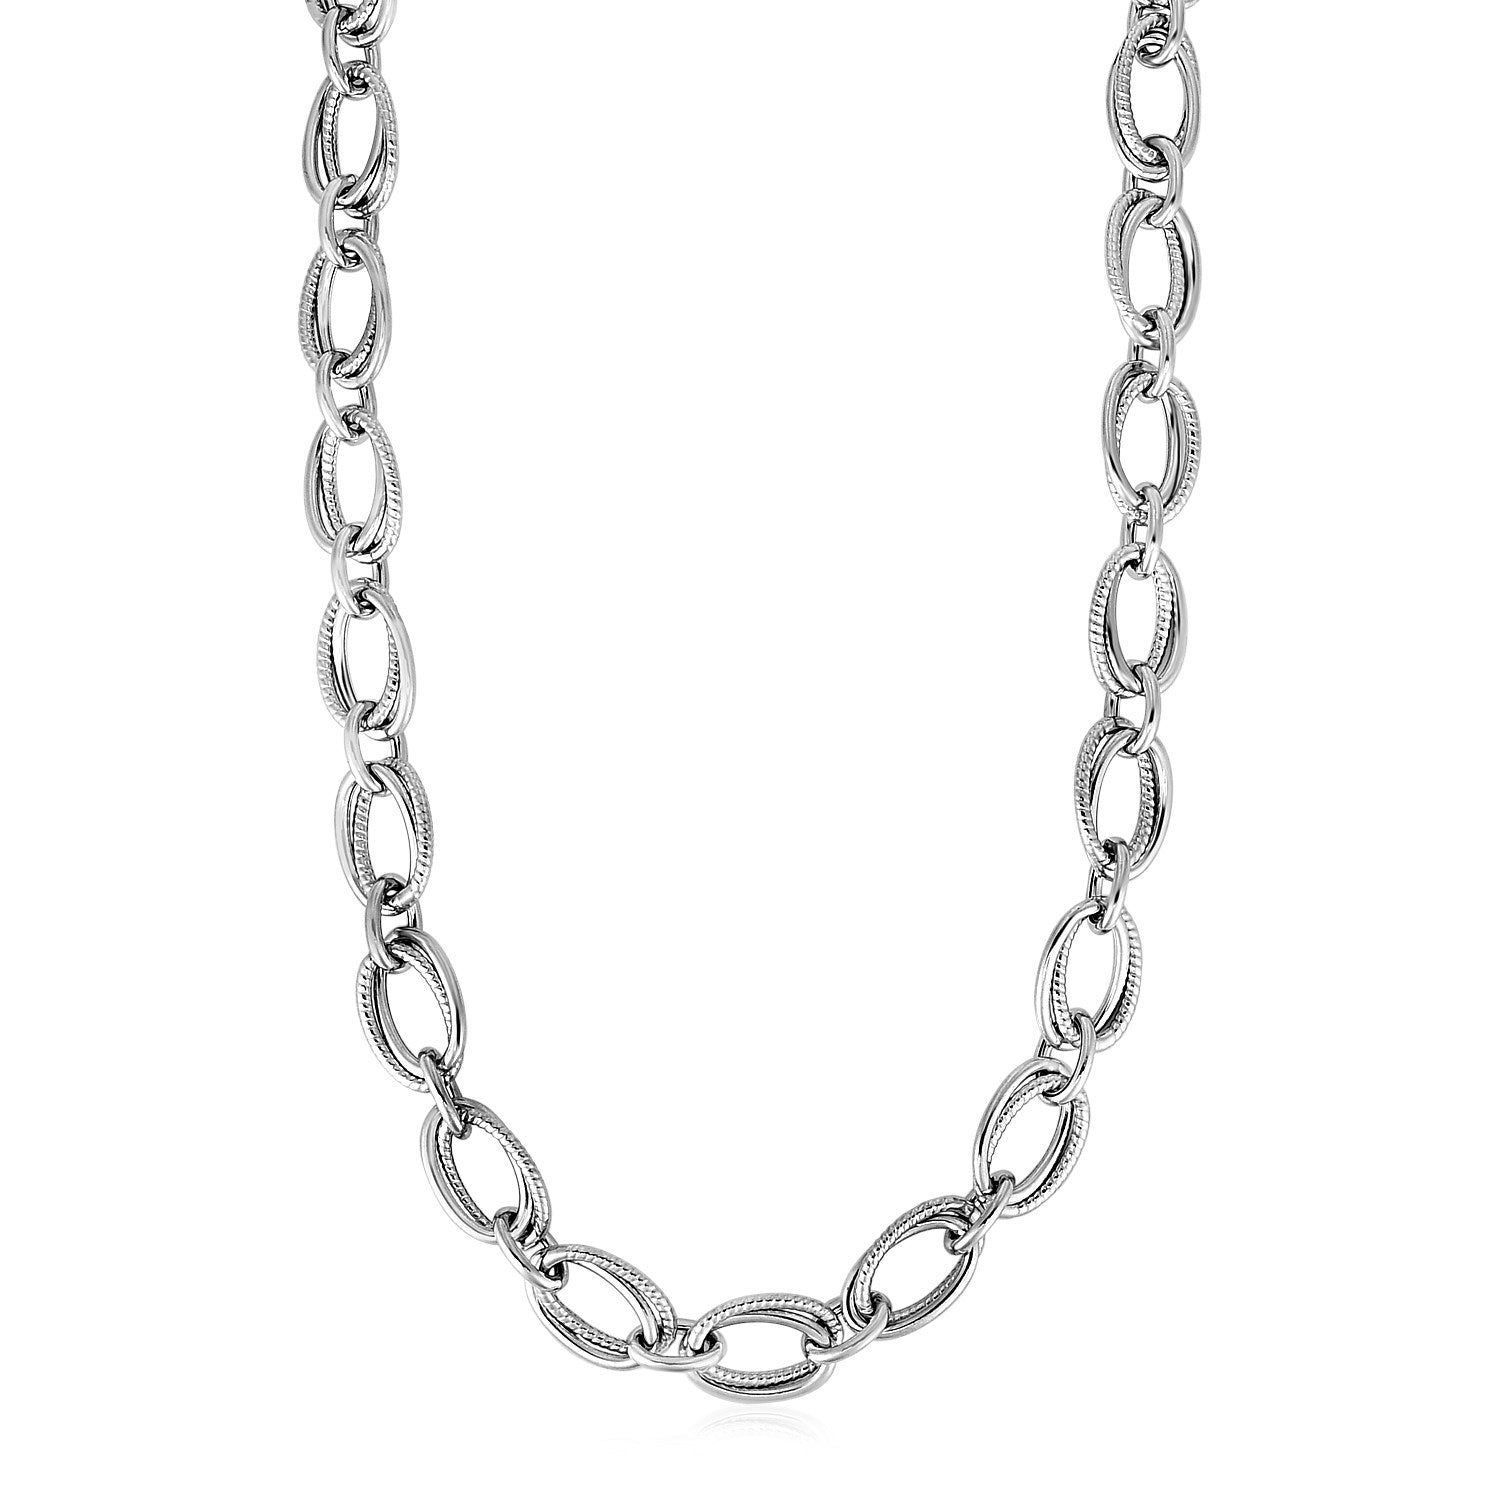 Polished and Textured Oval Link Necklace in Sterling Silver